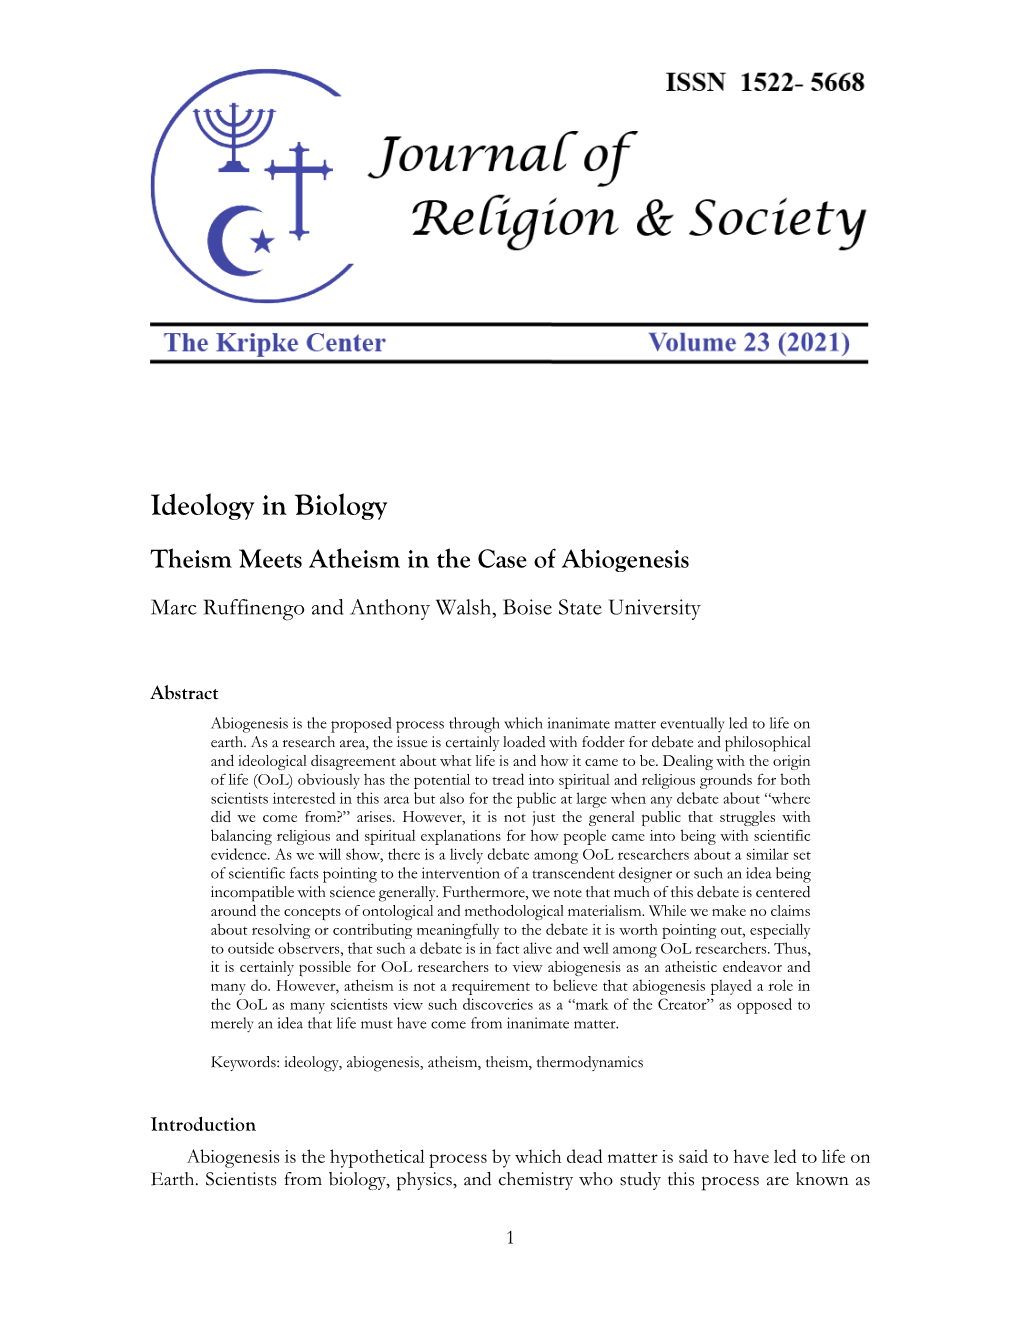 Ideology in Biology Theism Meets Atheism in the Case of Abiogenesis